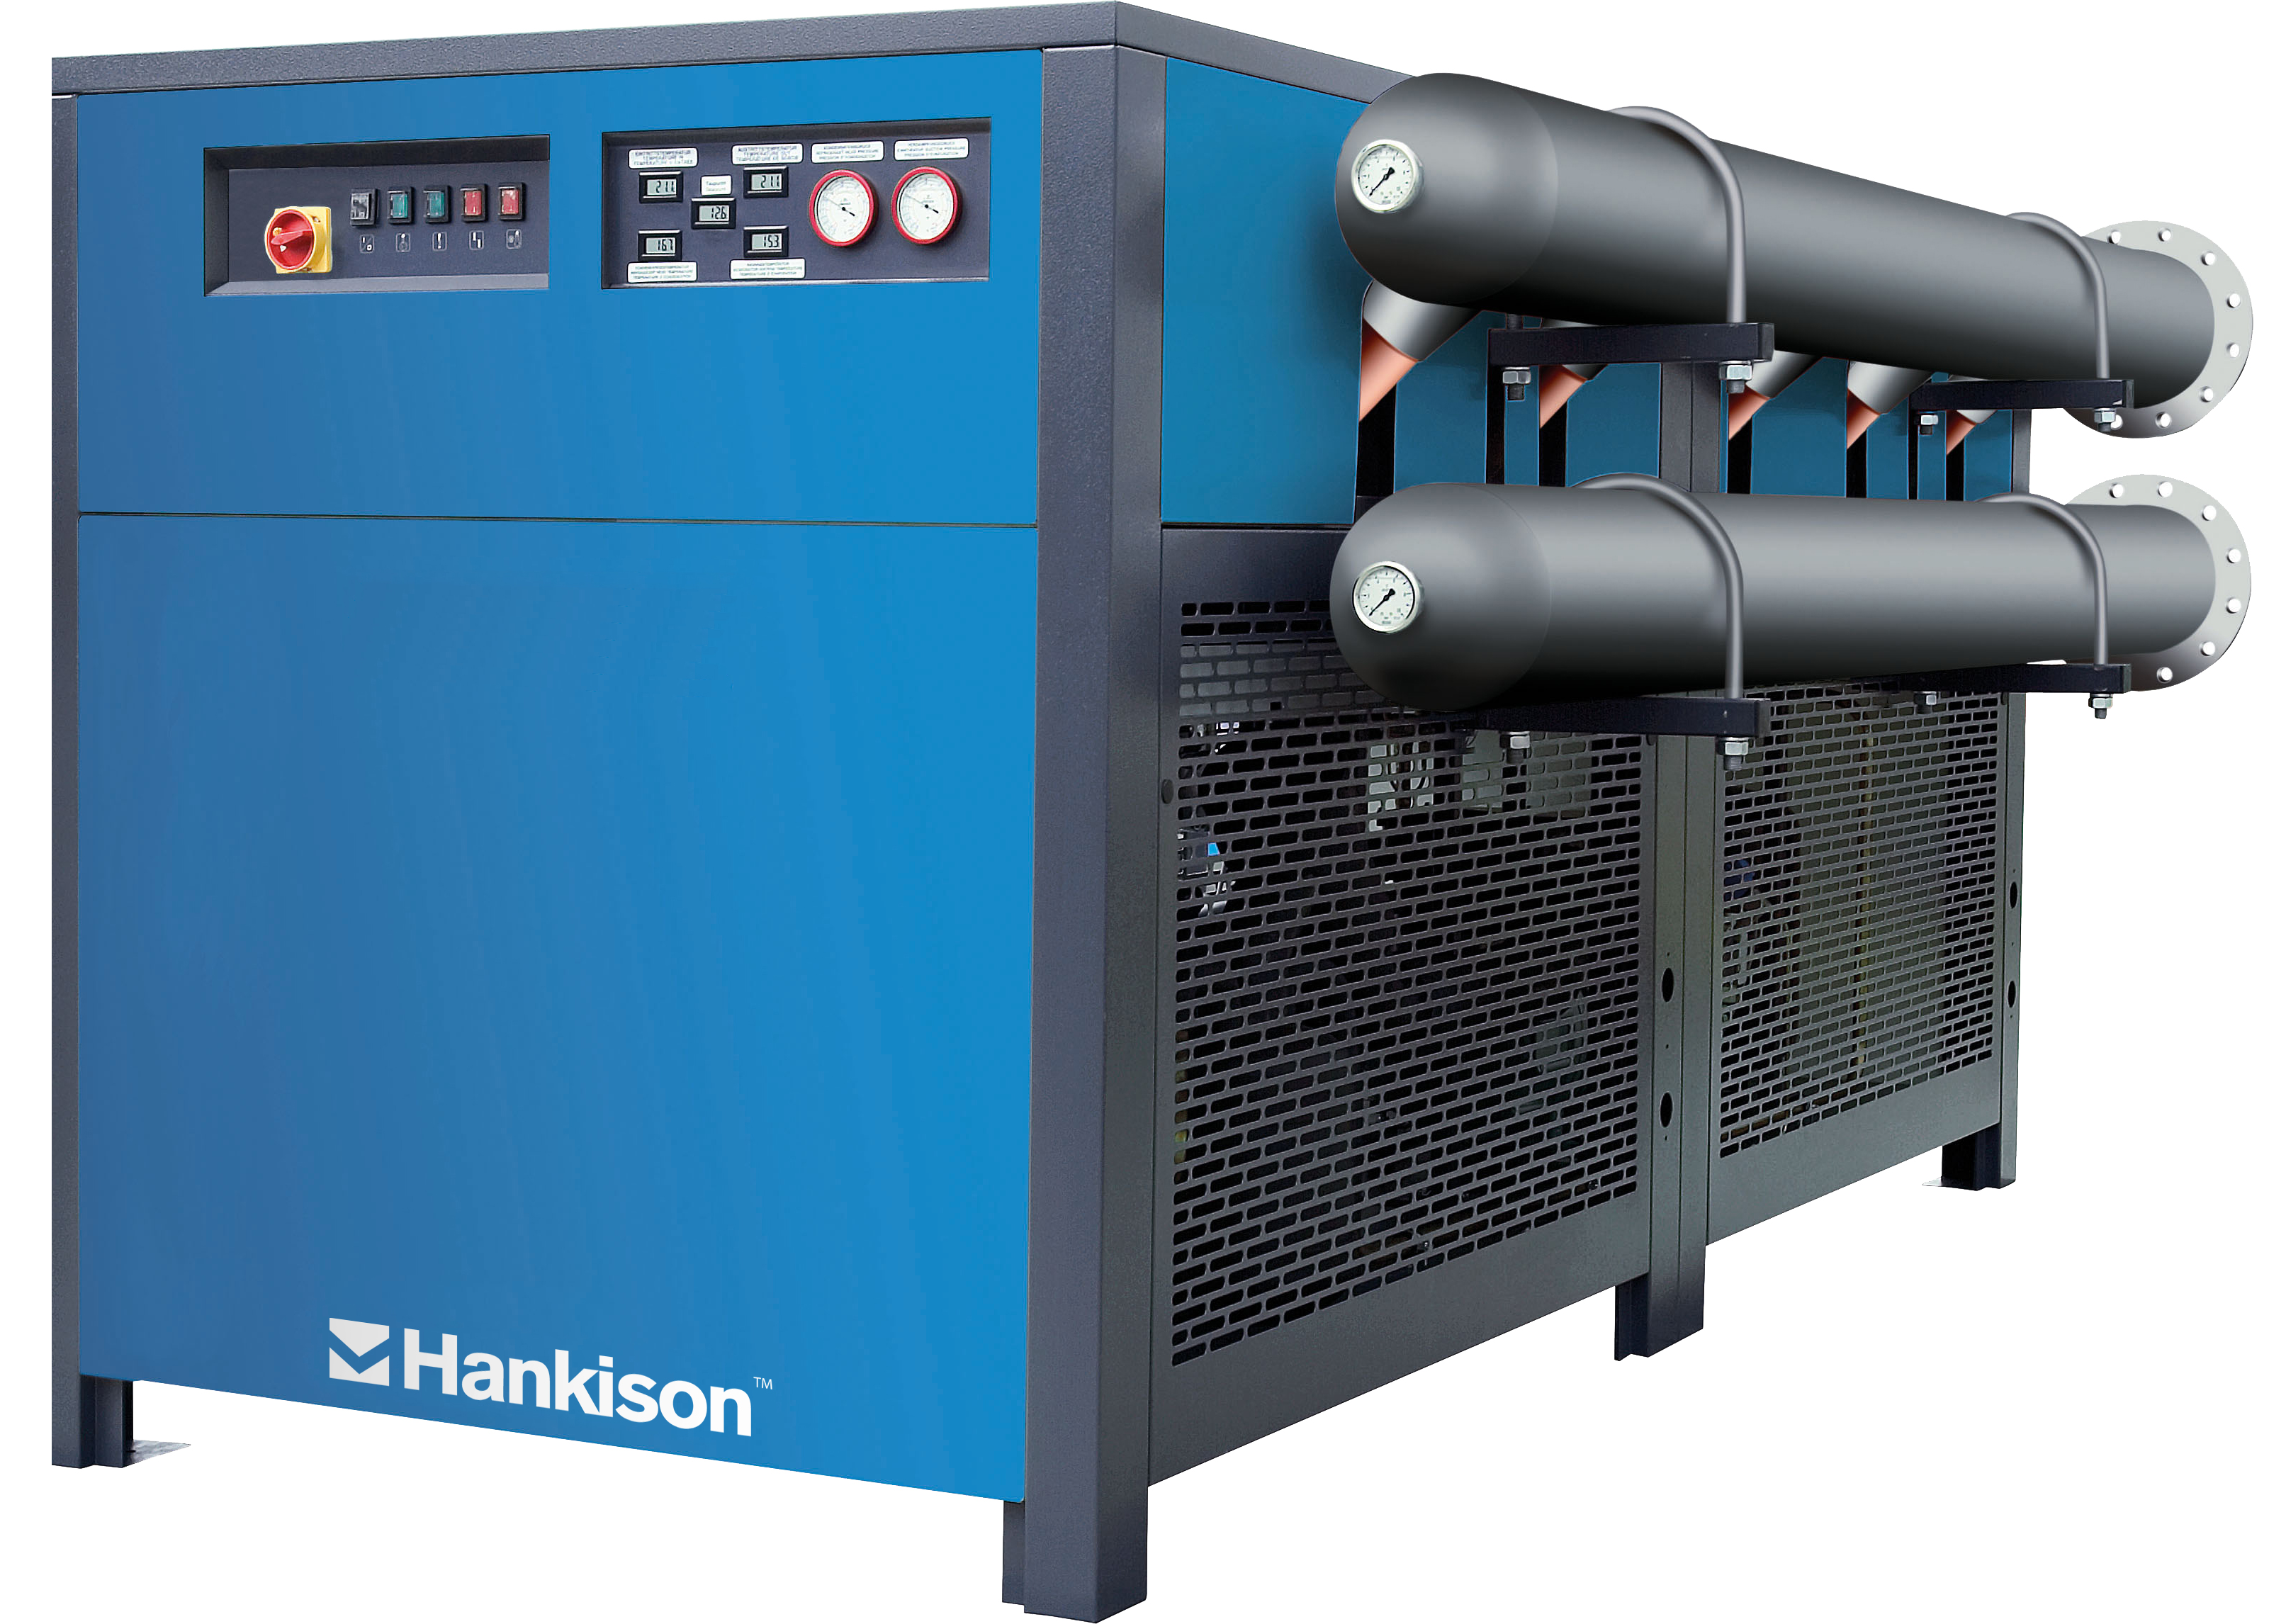 Hankison H-series large 3-stage refrigerated air dryer